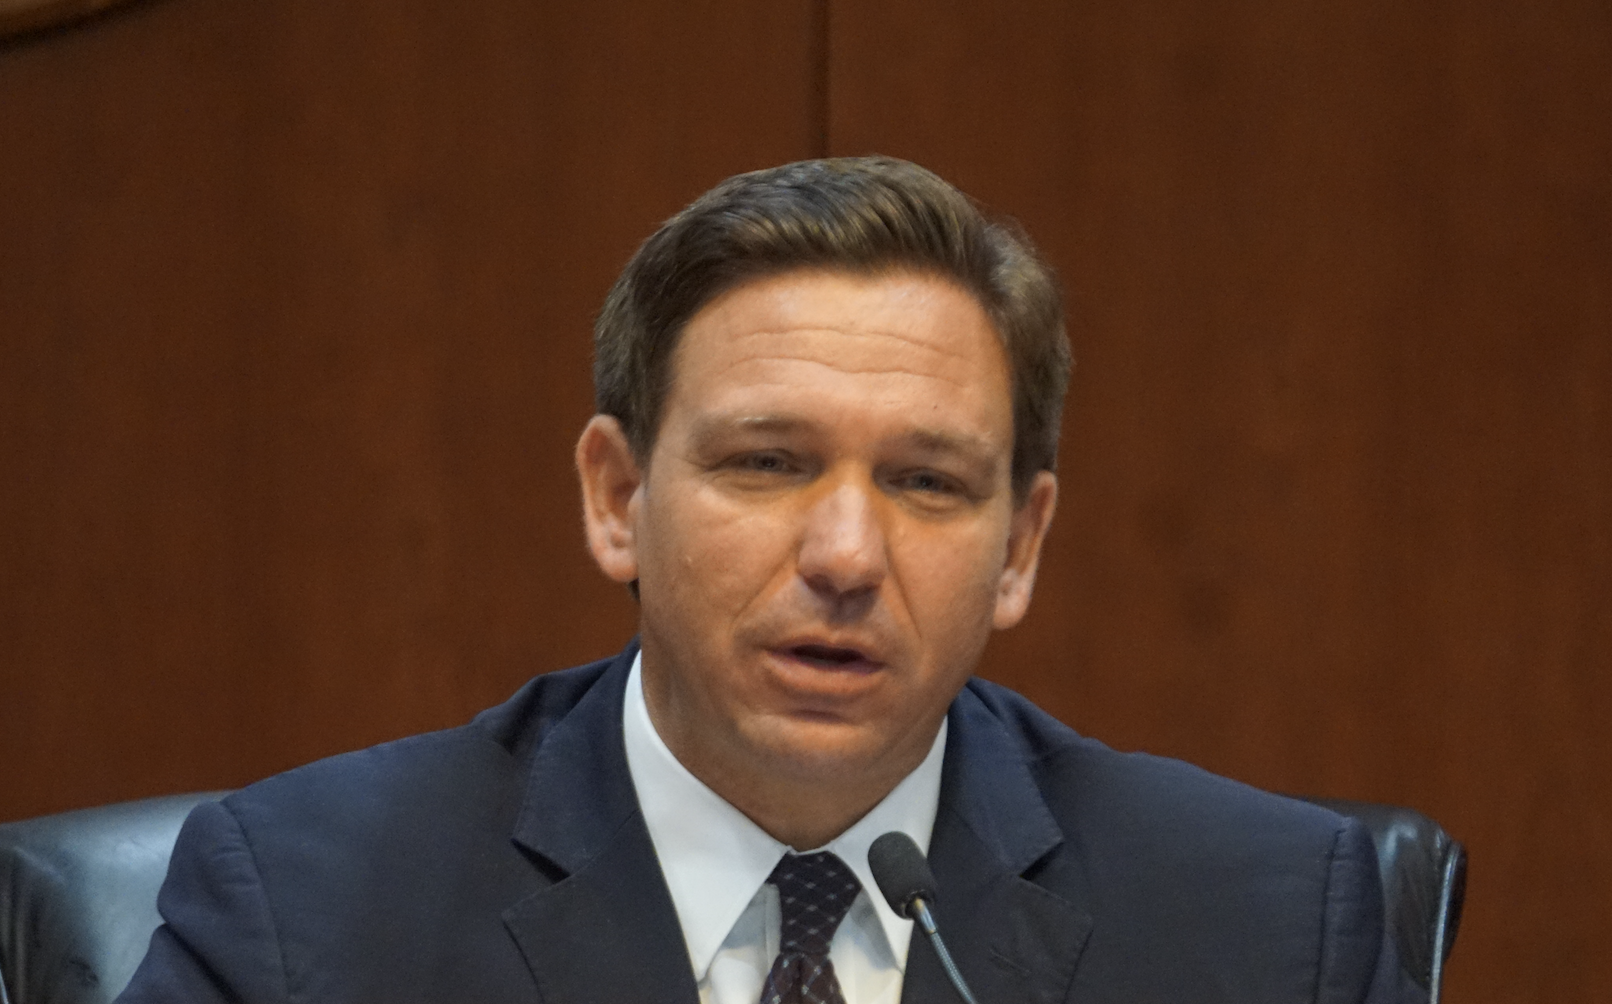 Ron DeSantis Takes Victory Tour, Highlights of His First Term